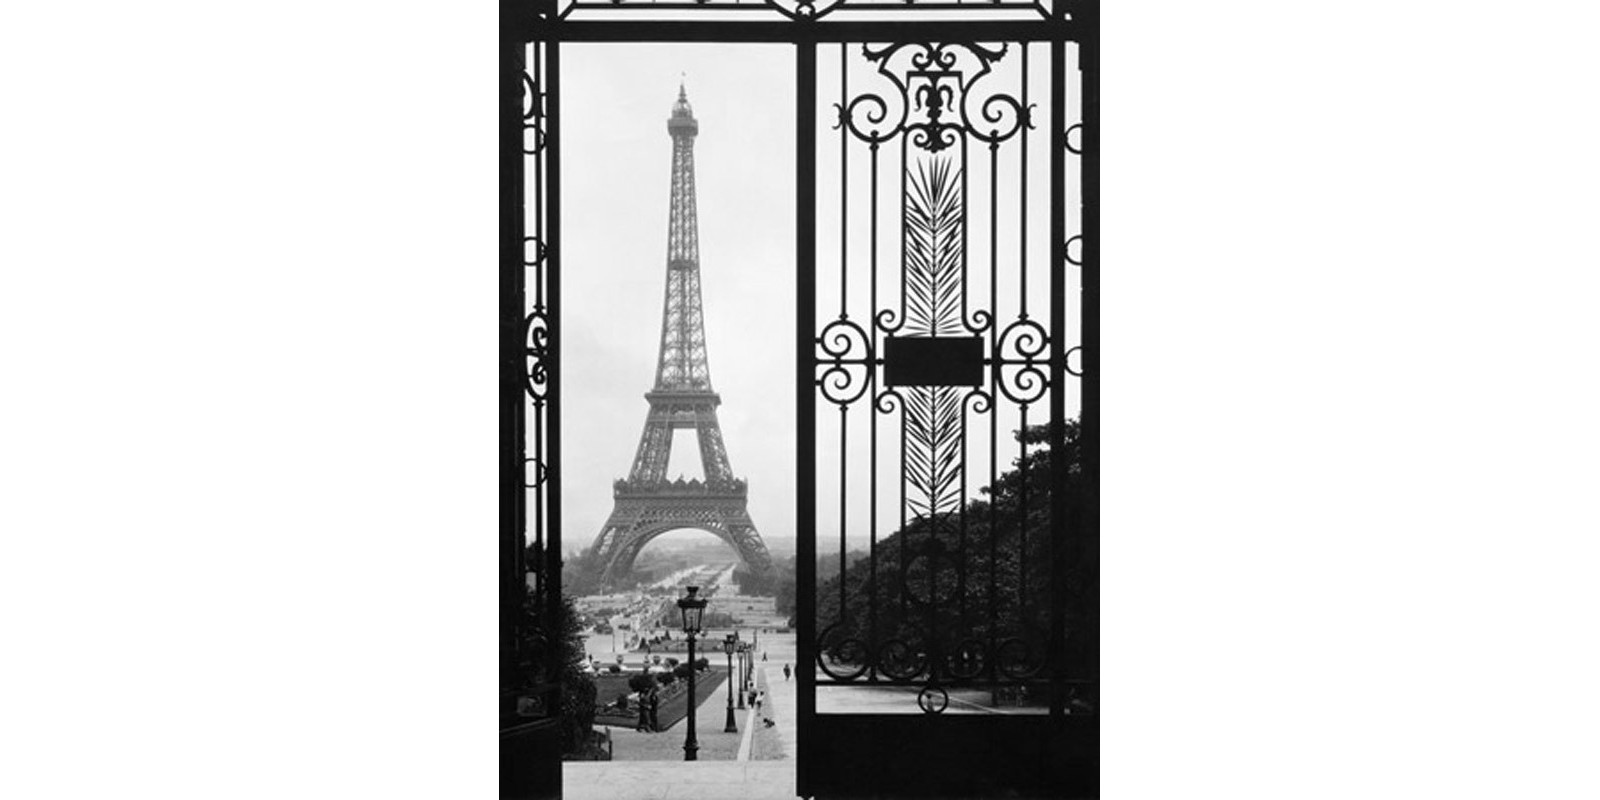 Anonymous - Eiffel Tower from the Trocadero Palace, Paris